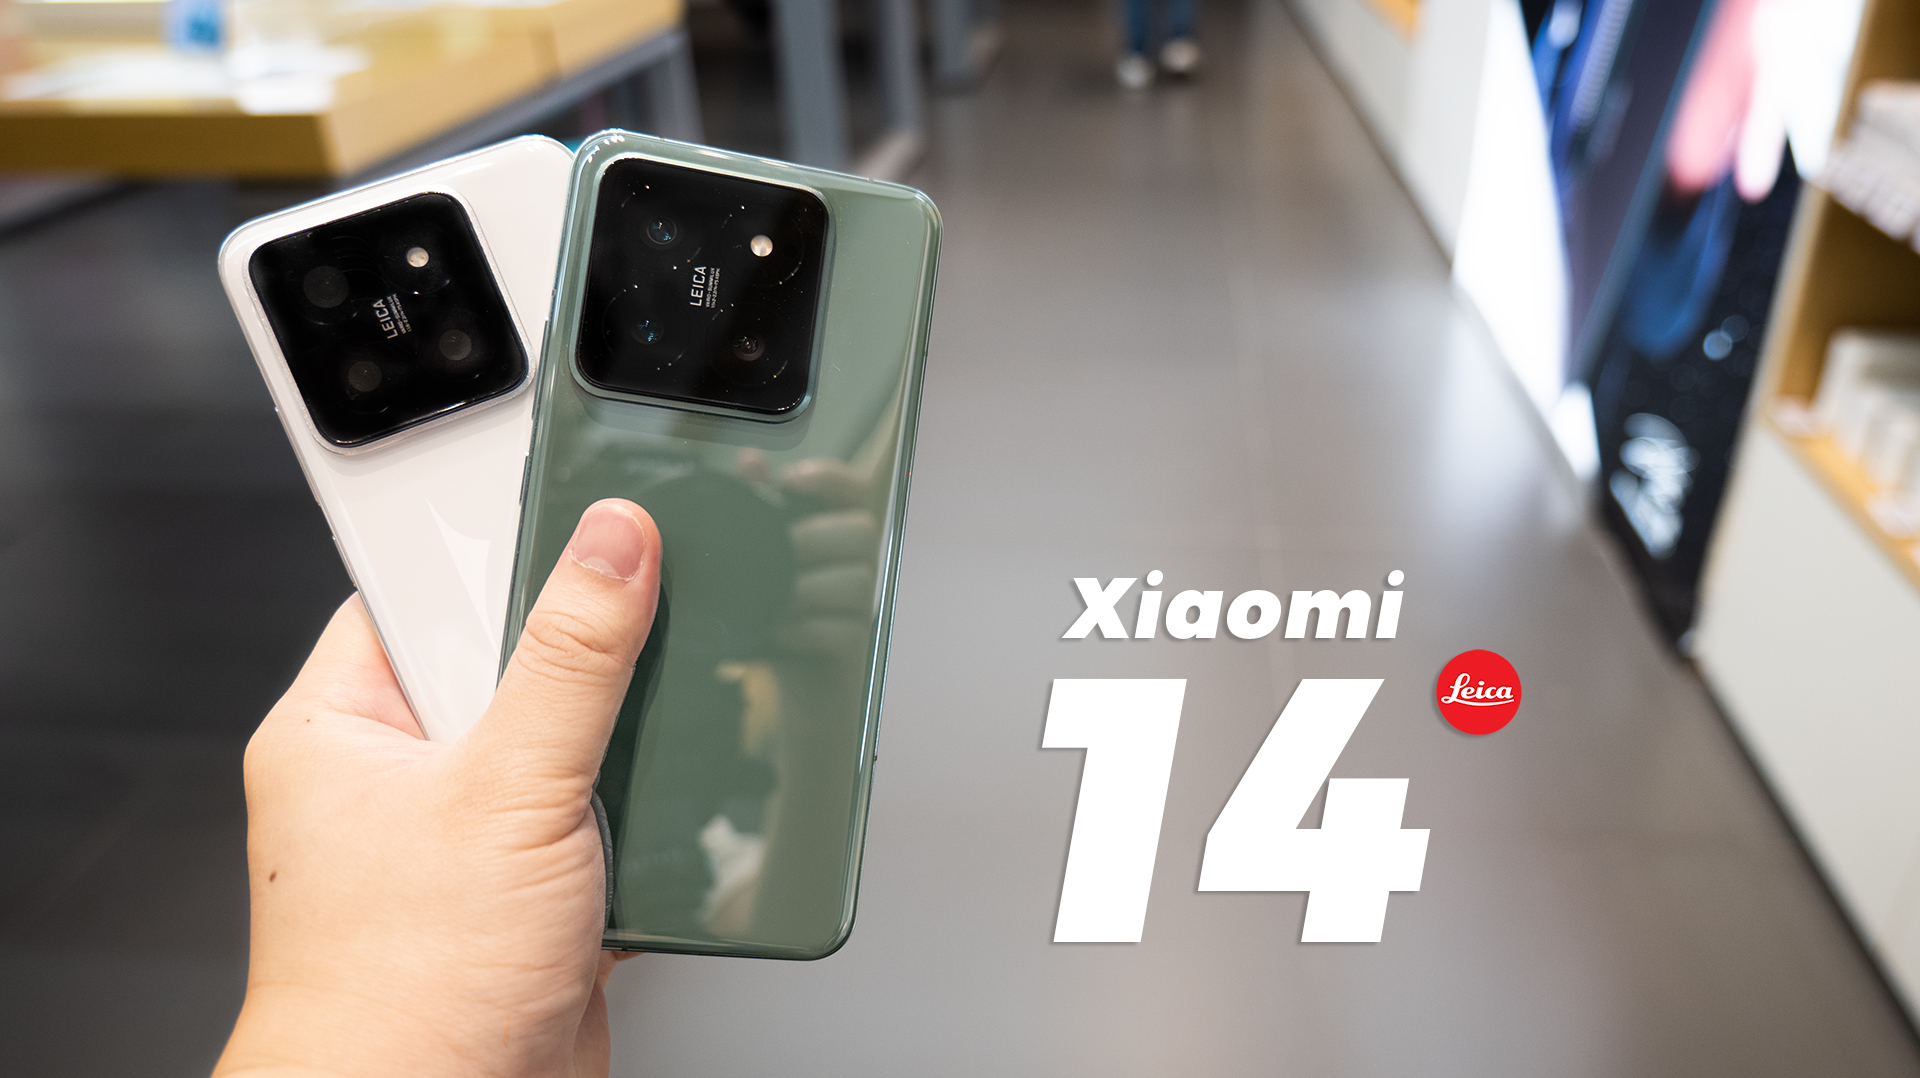 Xiaomi 14 Pro Unboxing & First Look - The New Pro Smartphone